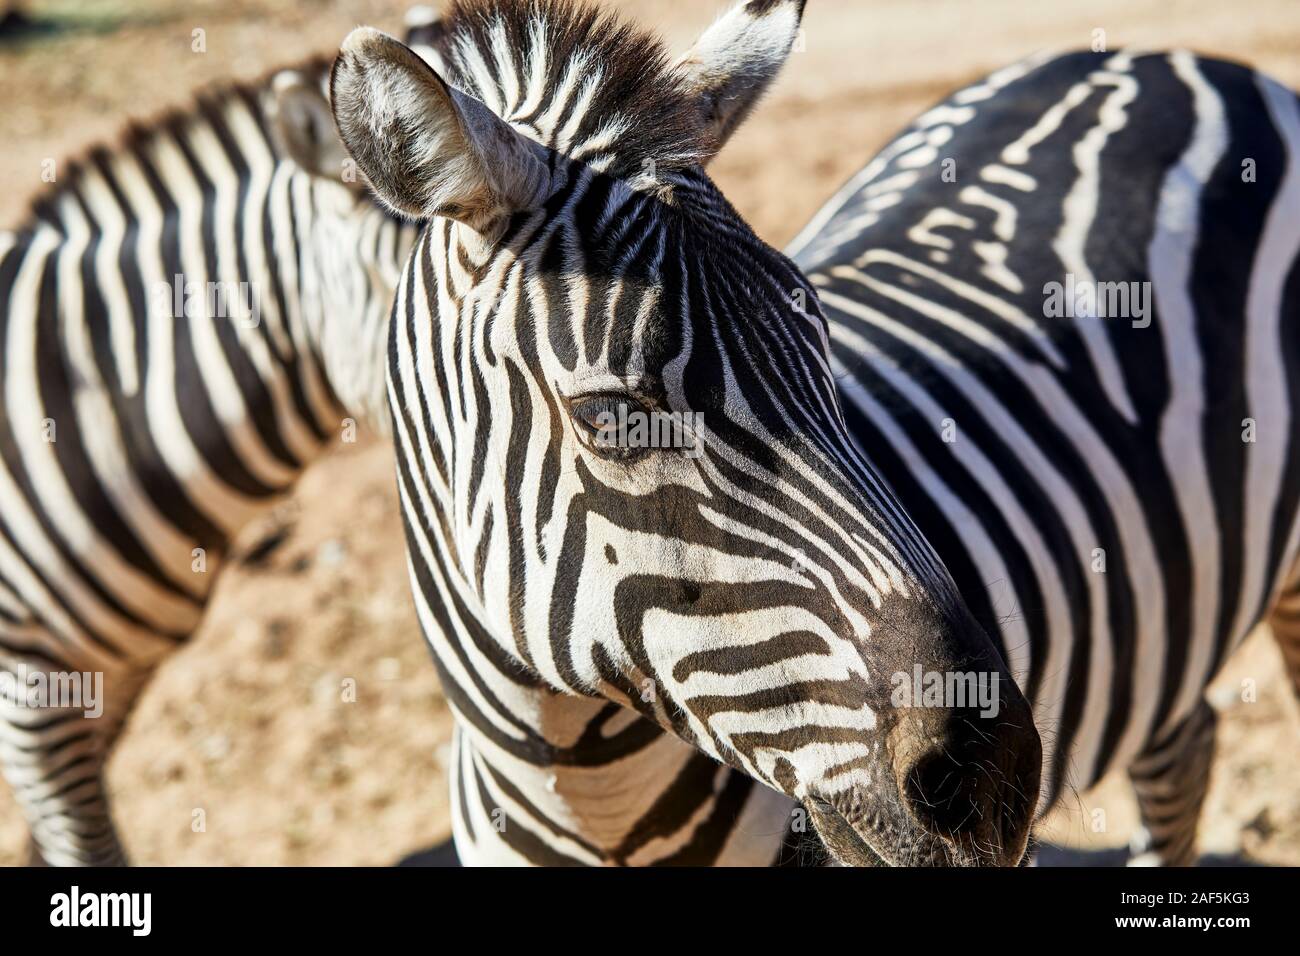 Close up profile of the side of a Zebra's face Stock Photo